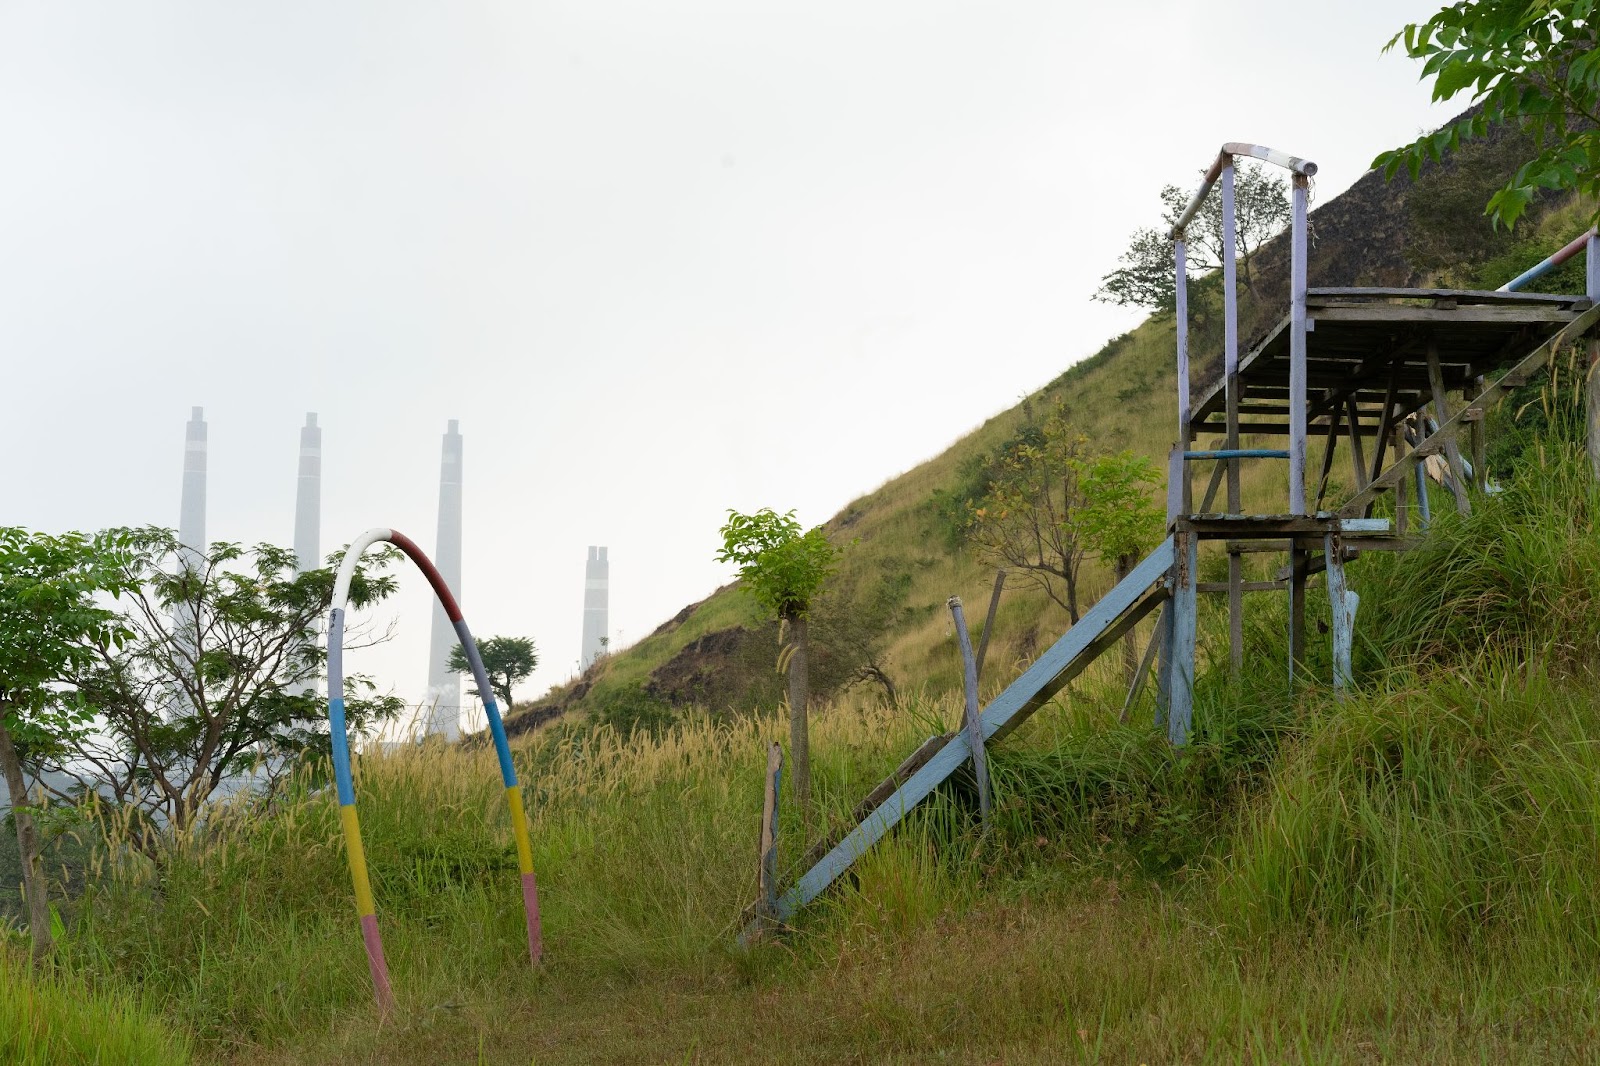 Local Residents Live and Play in the Shadows of the Suralaya’s Power Plant